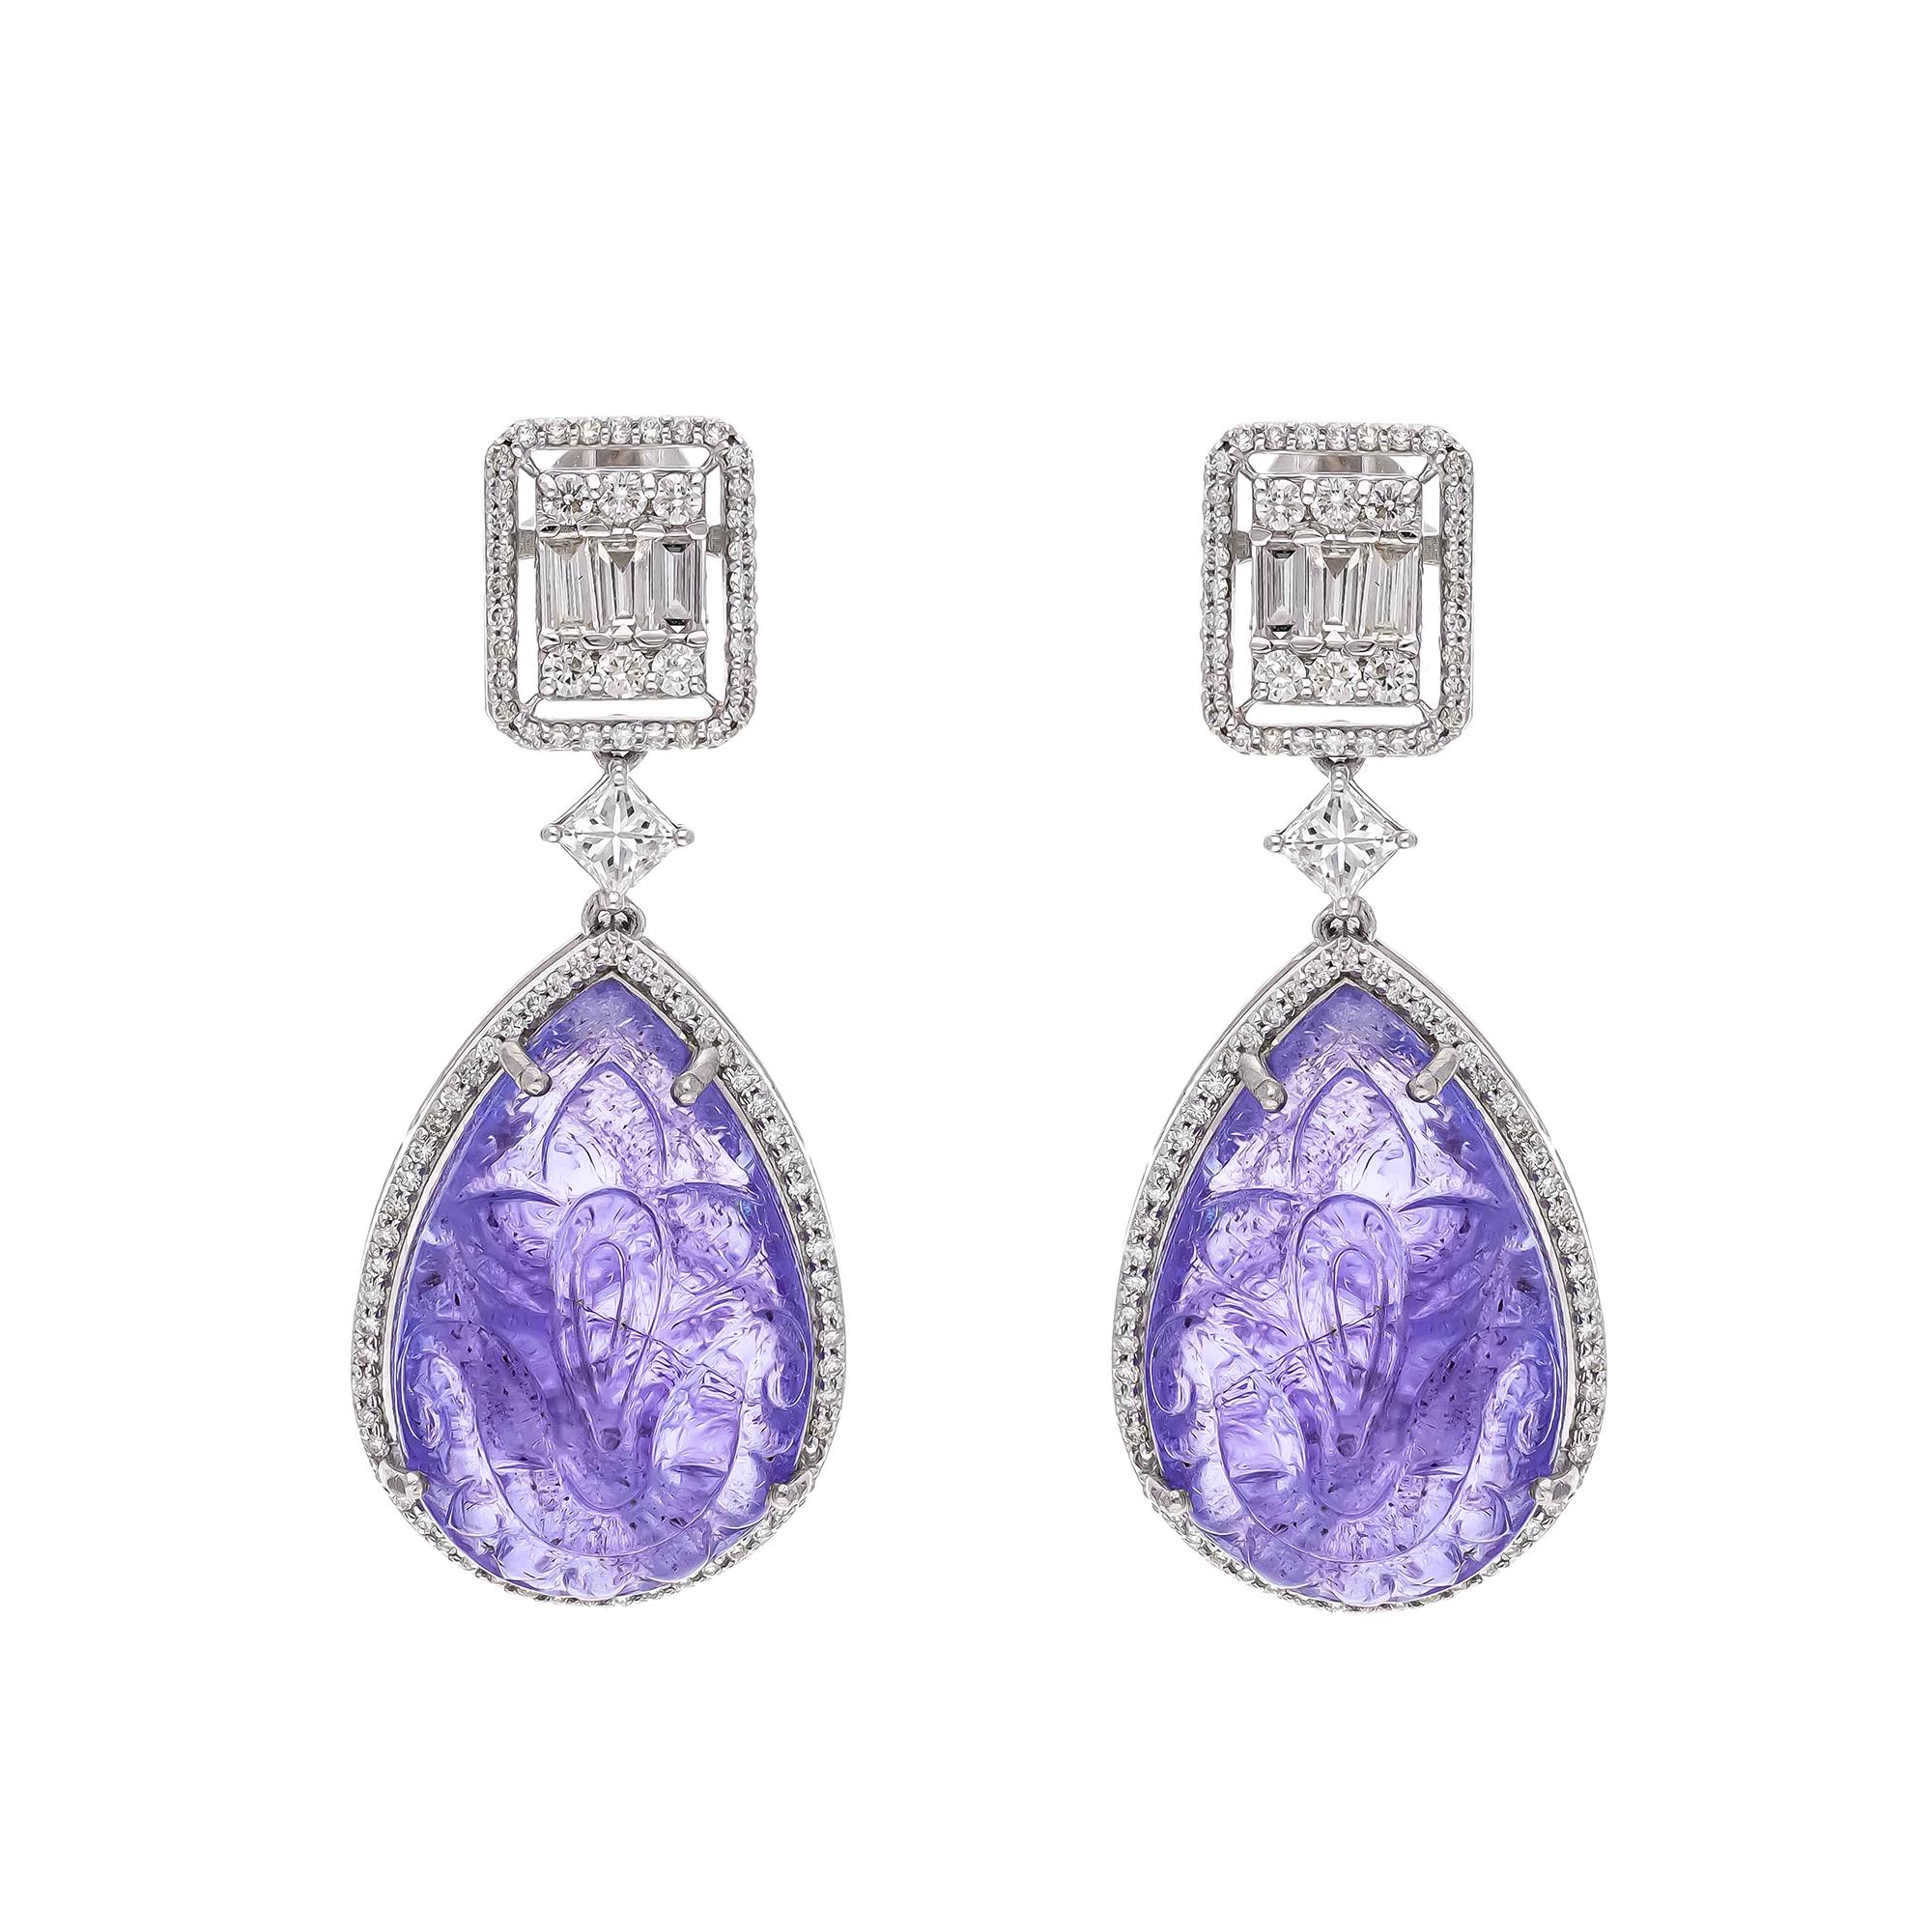 Women's Natural Tanzenite Earring with 1.86 Cts Diamond & Tanzenite 35.40 Cts in 18k For Sale